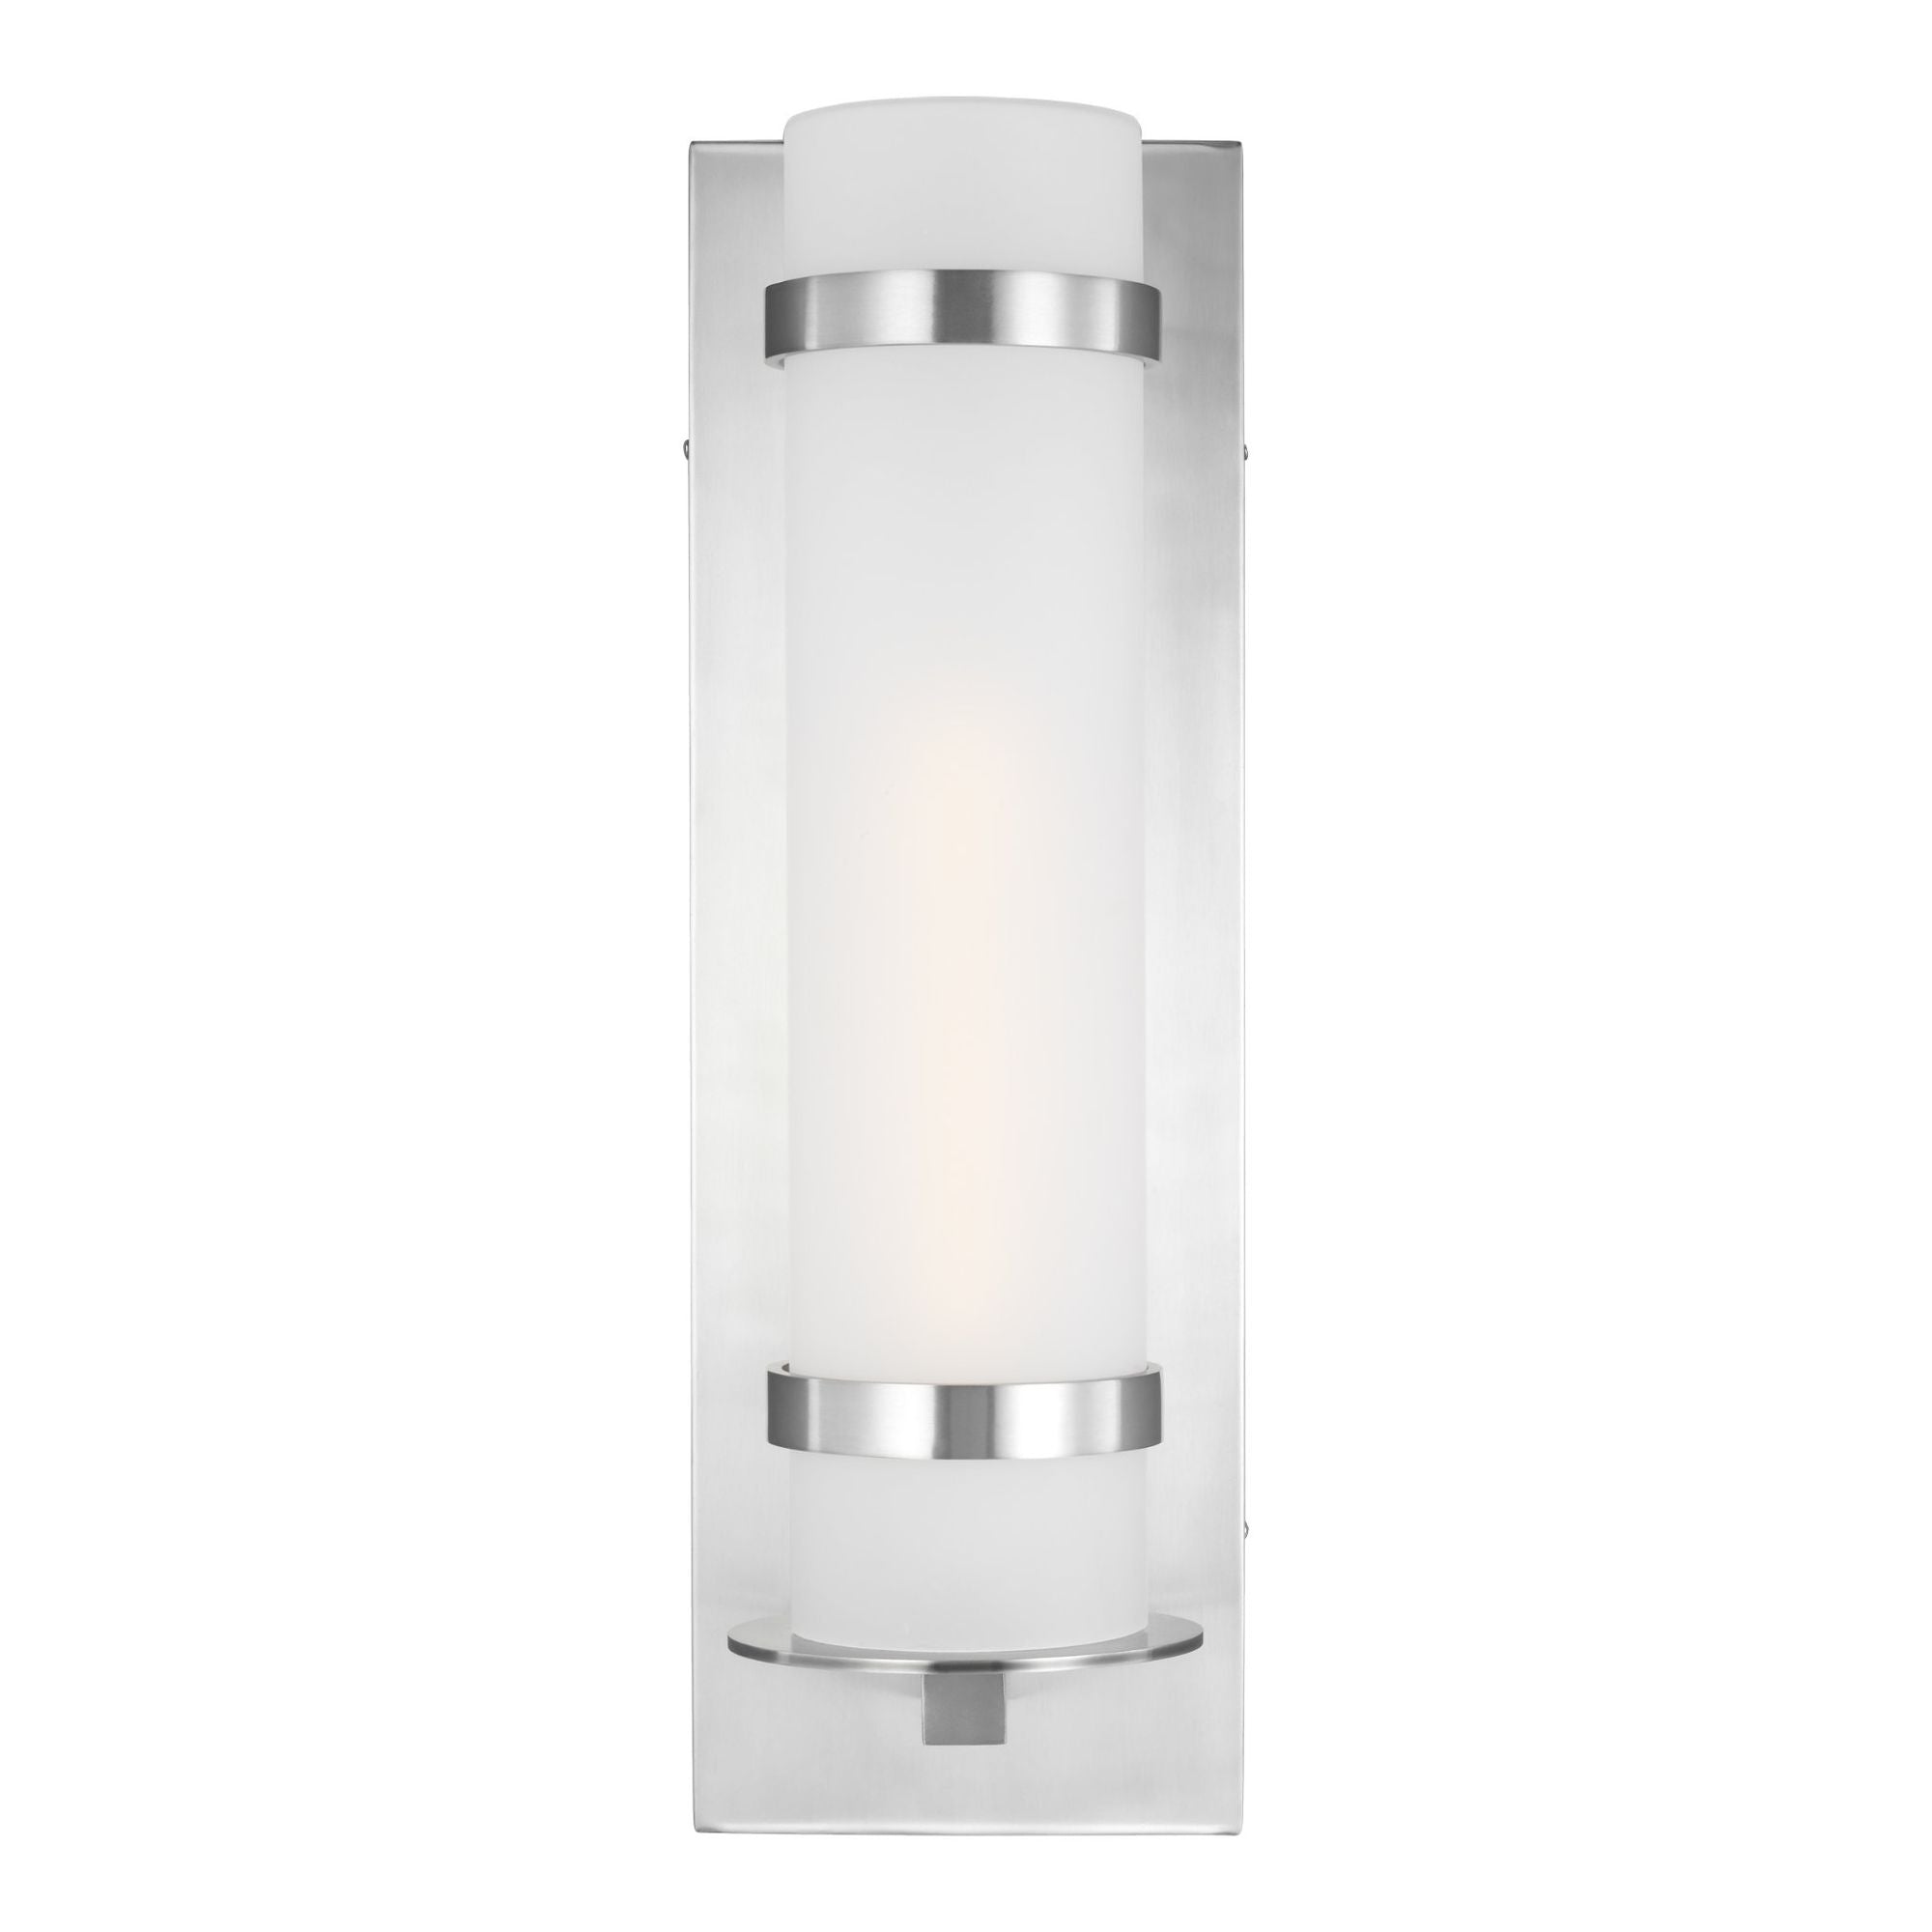 Alban Large One Light Outdoor Wall Lantern LED Modern Fixture 8" Width 24.625" Height Aluminum Round Etched Opal Shade in Satin